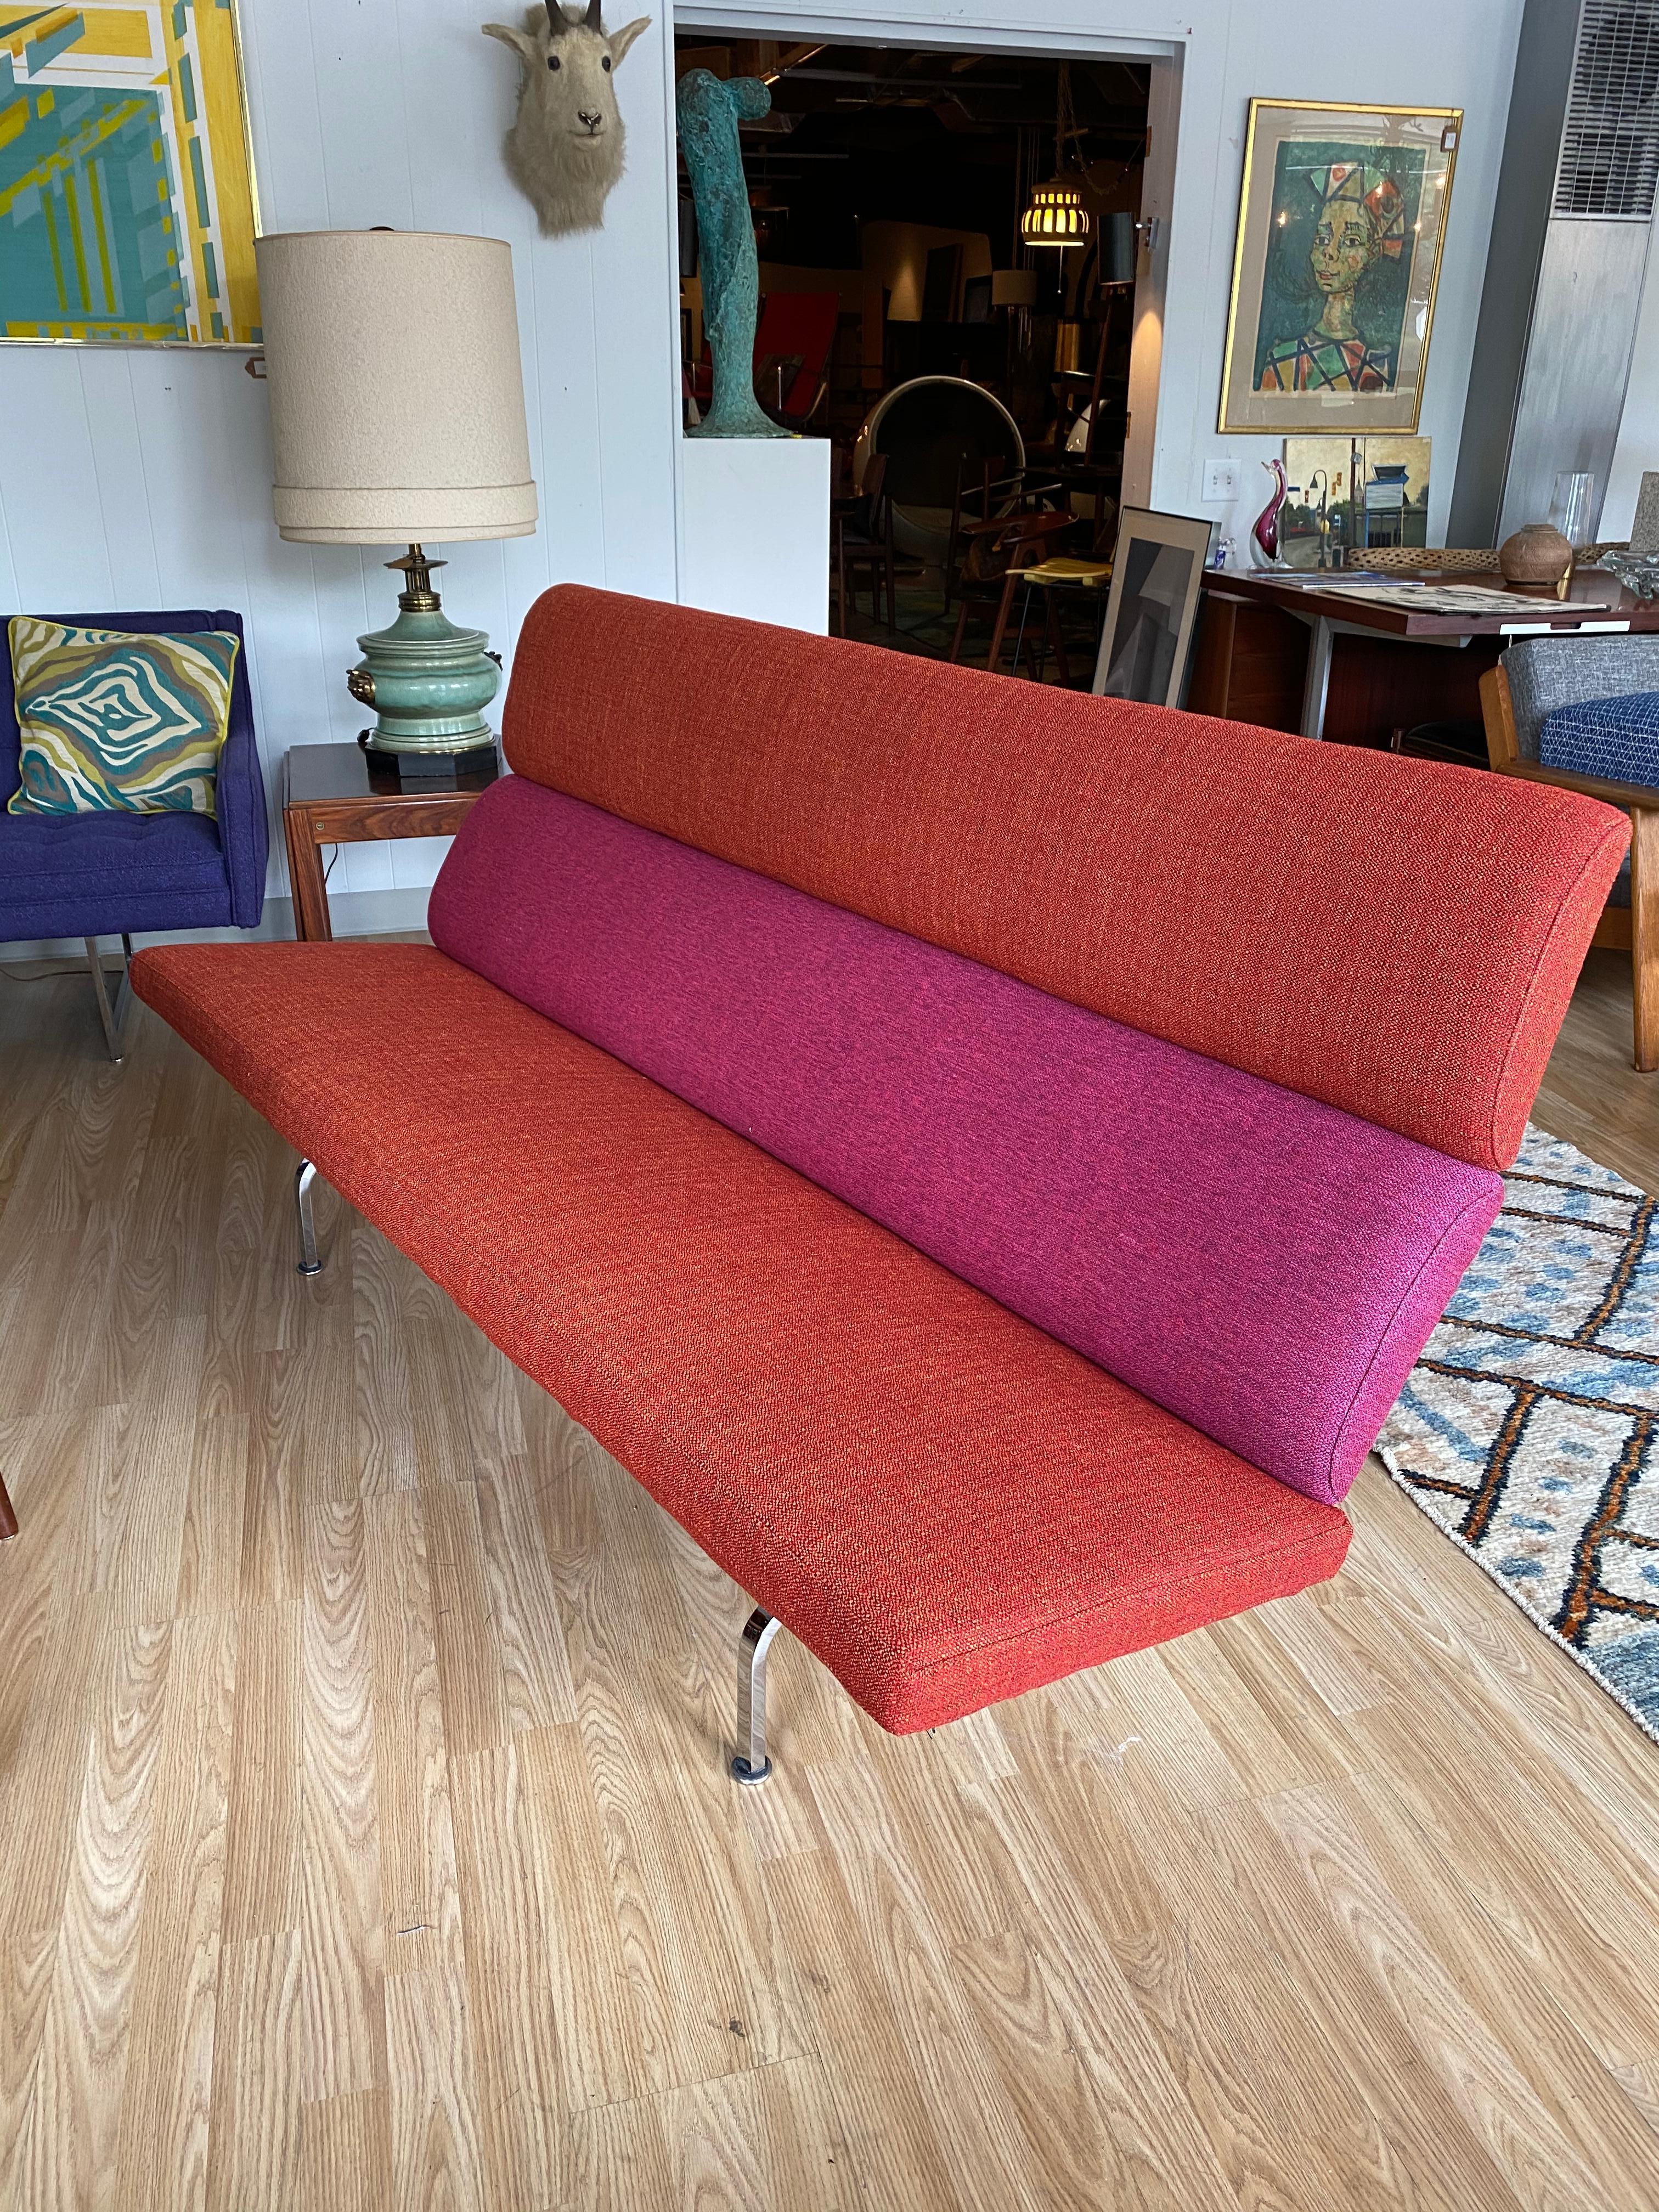 Designed by Charles and Ray Eames for Herman Miller, this bold and bright vintage compact sofa is in overall good condition.  New upholstery in red and pink tweed.
Circa 1950s. USA.
Dimensions:
28